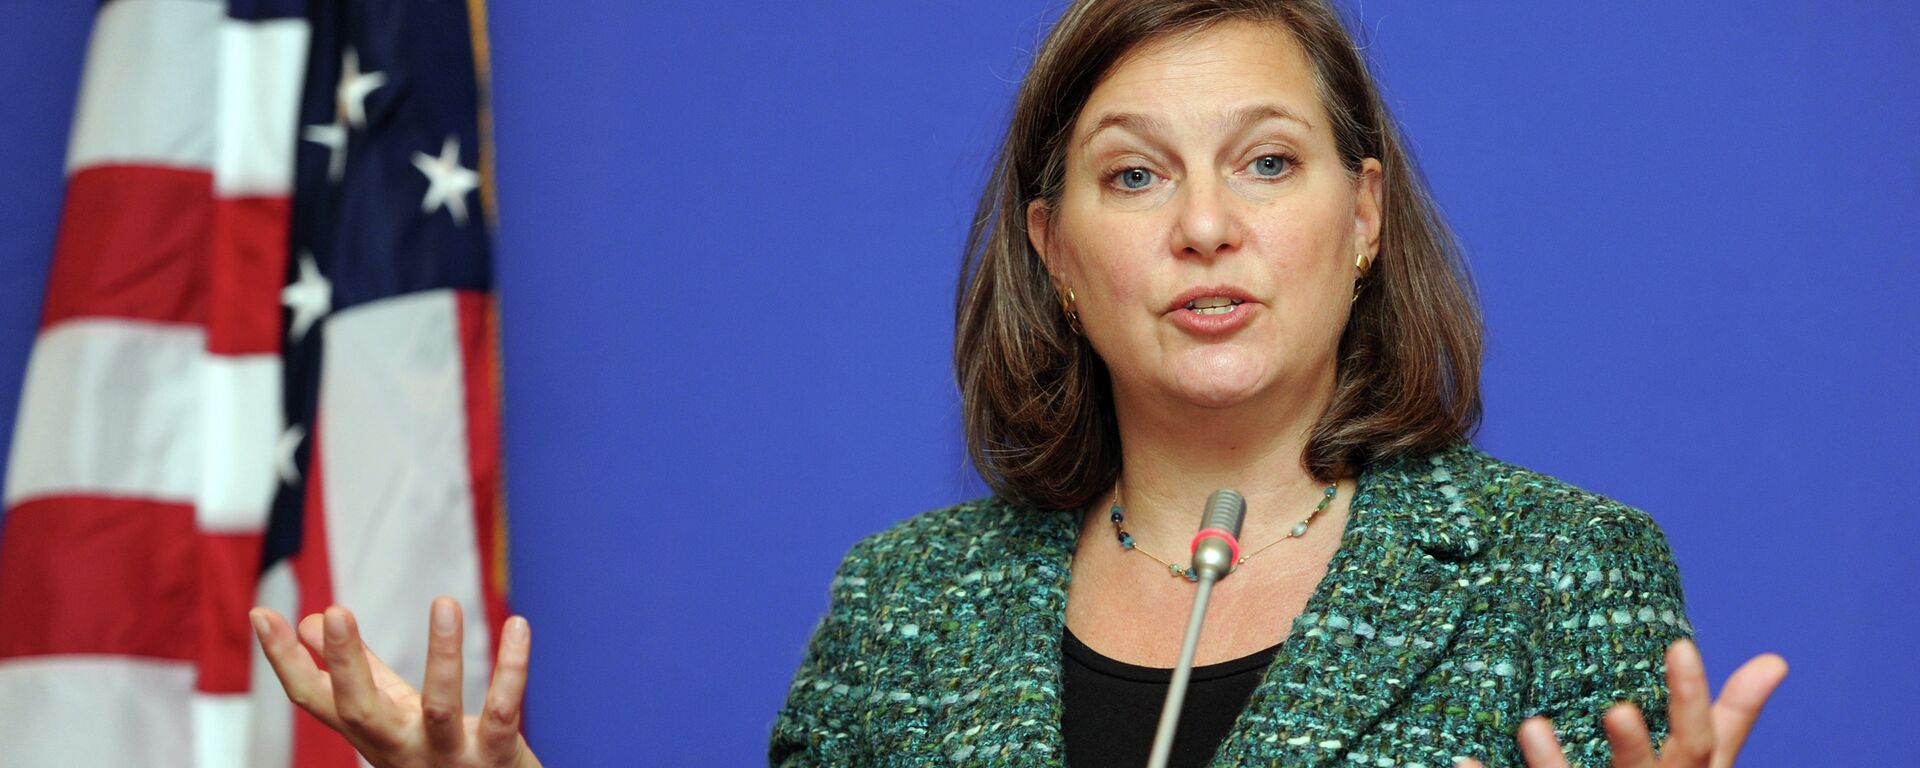 US Assistant Secretary of State for European and Eurasian Affairs Victoria Nuland gestures as she speaks during her press conference in Tbilisi - Sputnik International, 1920, 27.01.2017